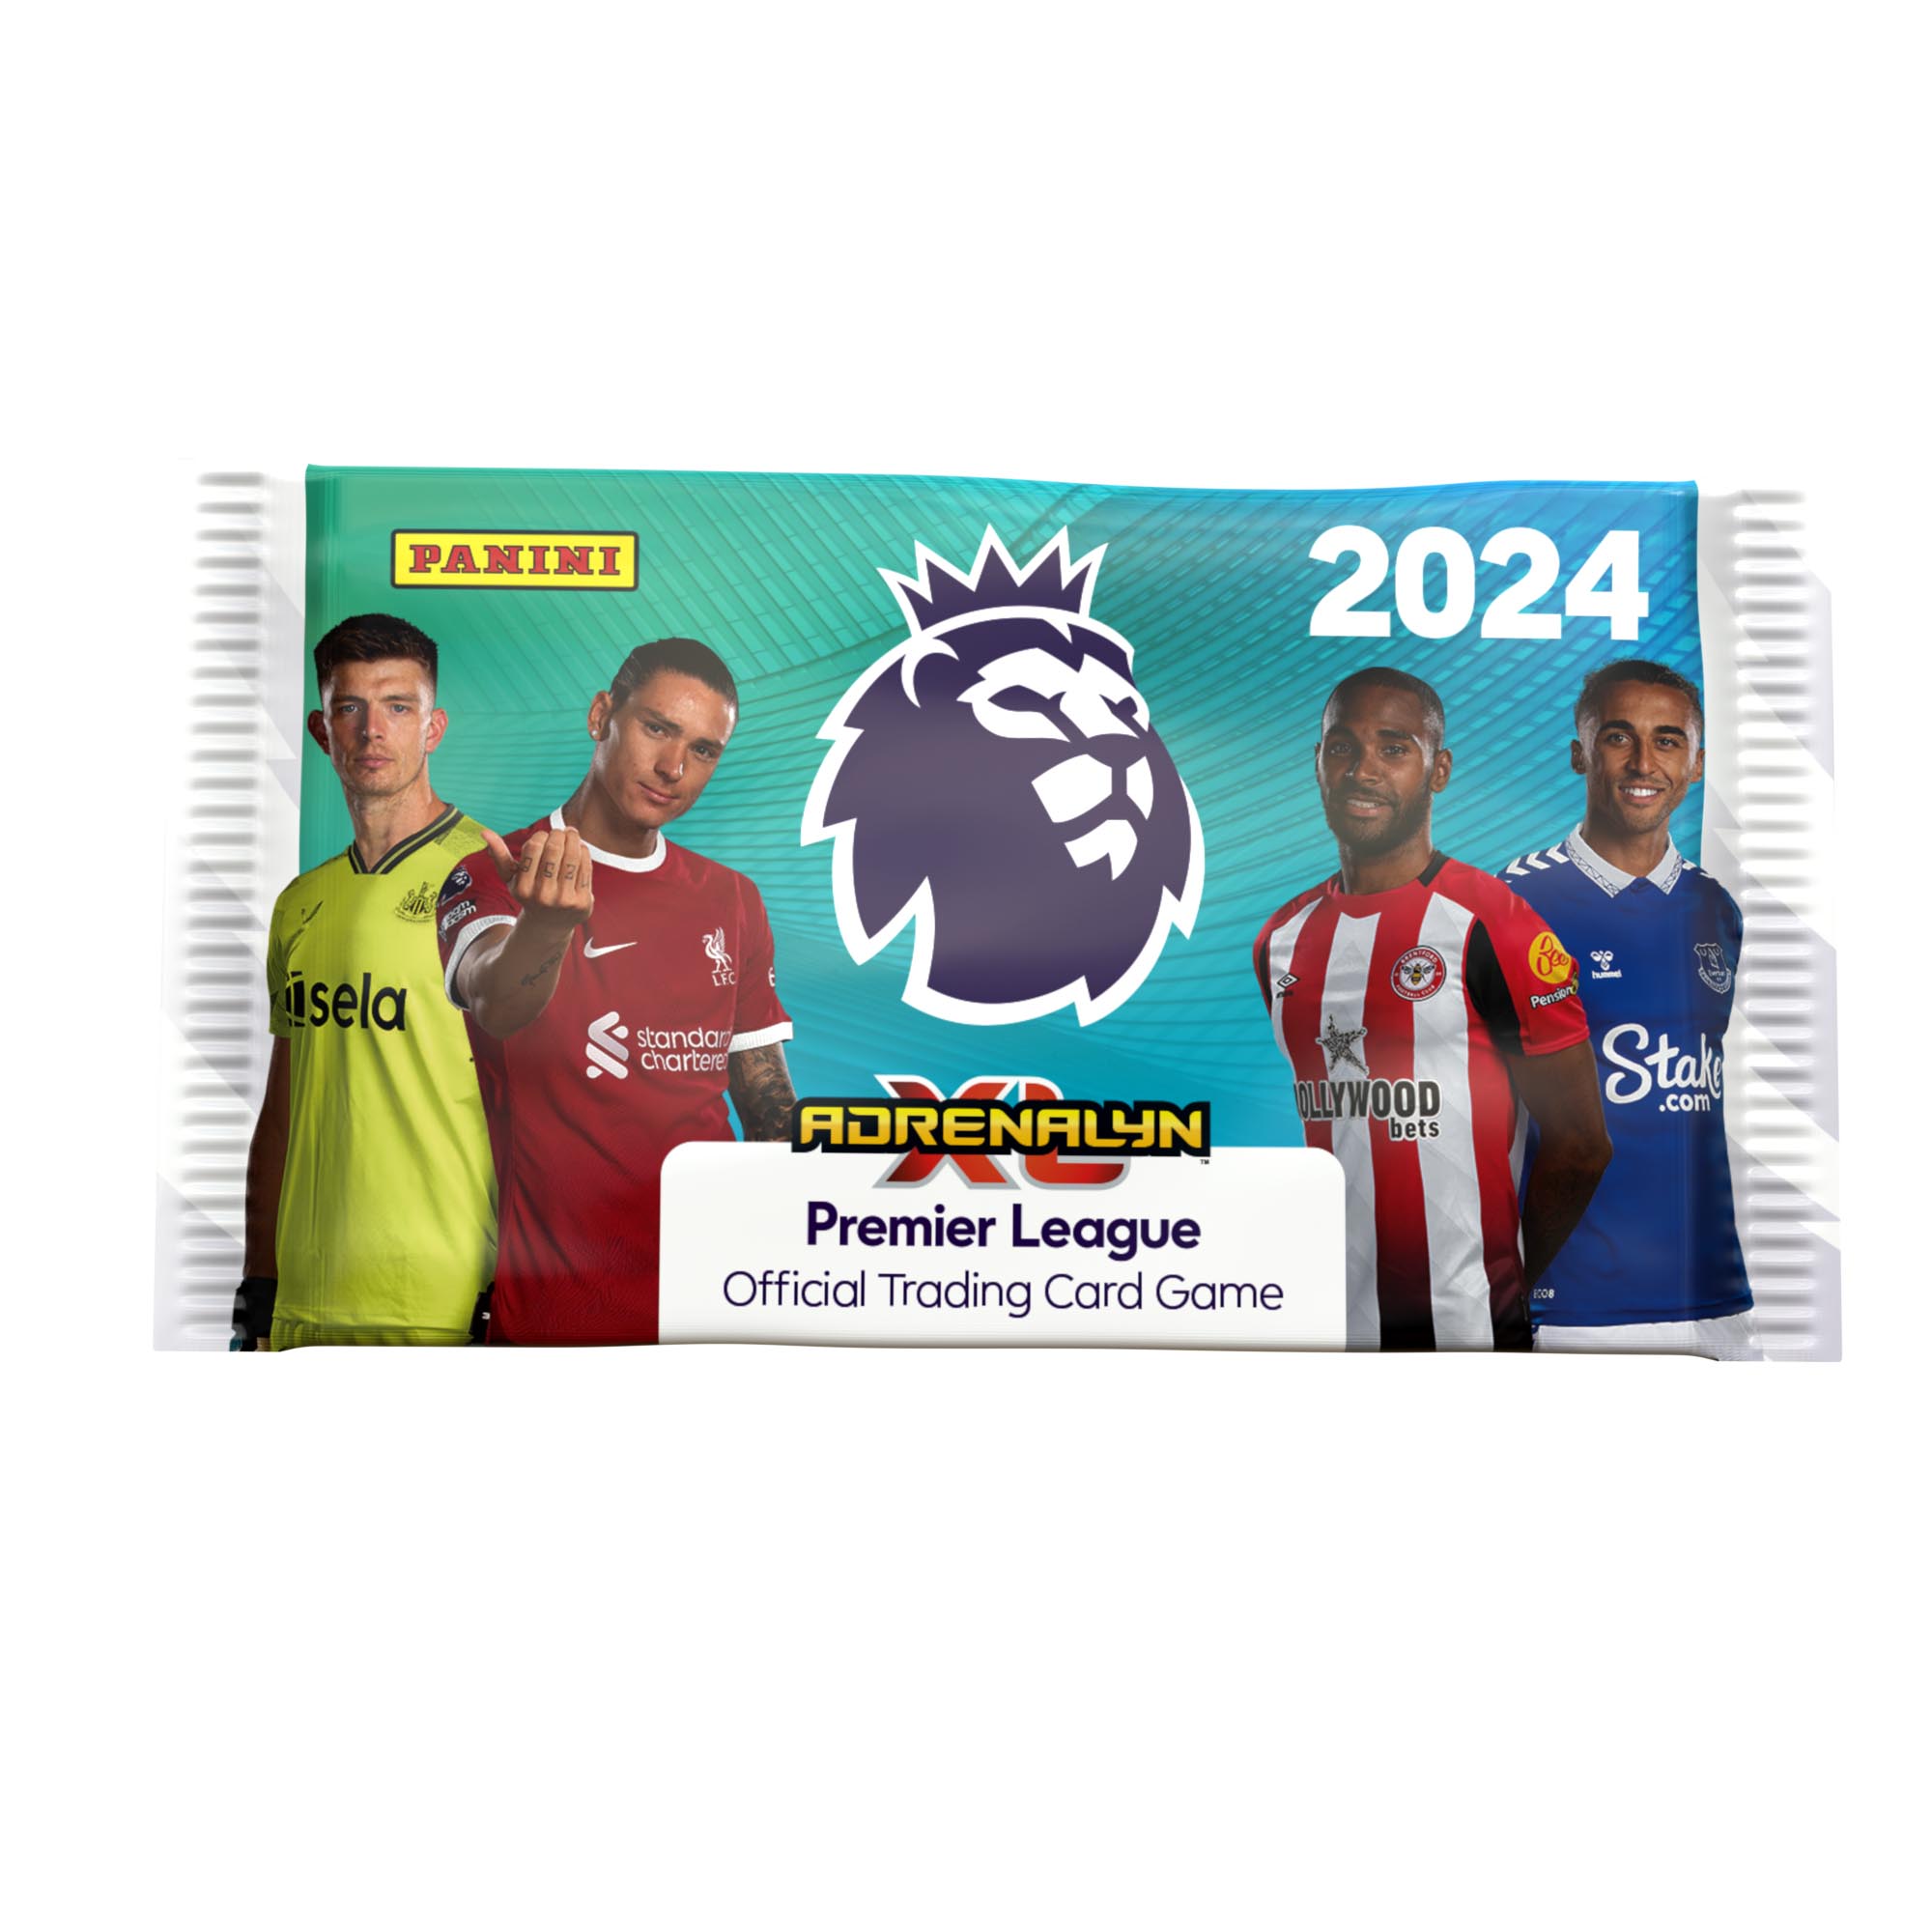 2023-24 PANINI ADRENALYN XL PREMIER LEAGUE CARDS - COUNTDOWN CALENDAR (132 CARDS) (IN STOCK OCT 15)